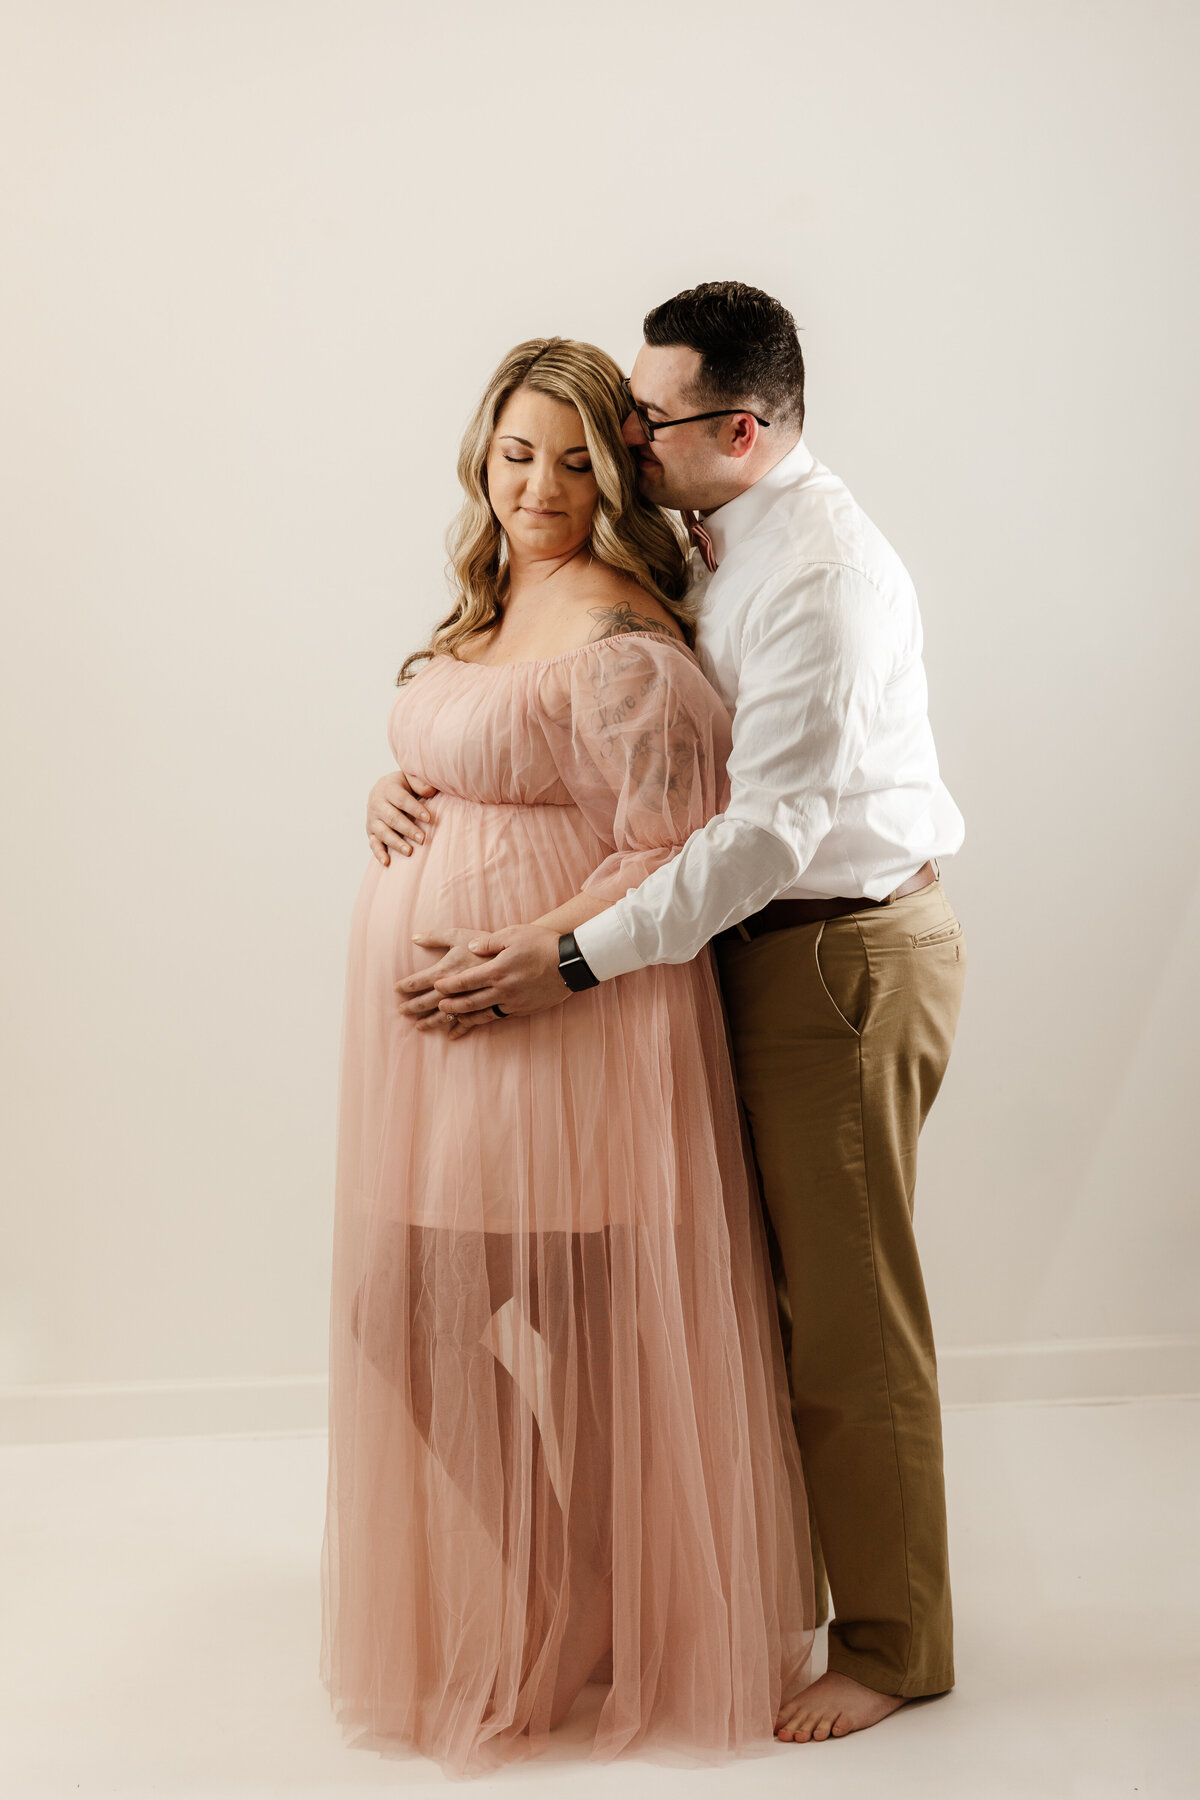 St Johns Michigan Maternity Pictures9